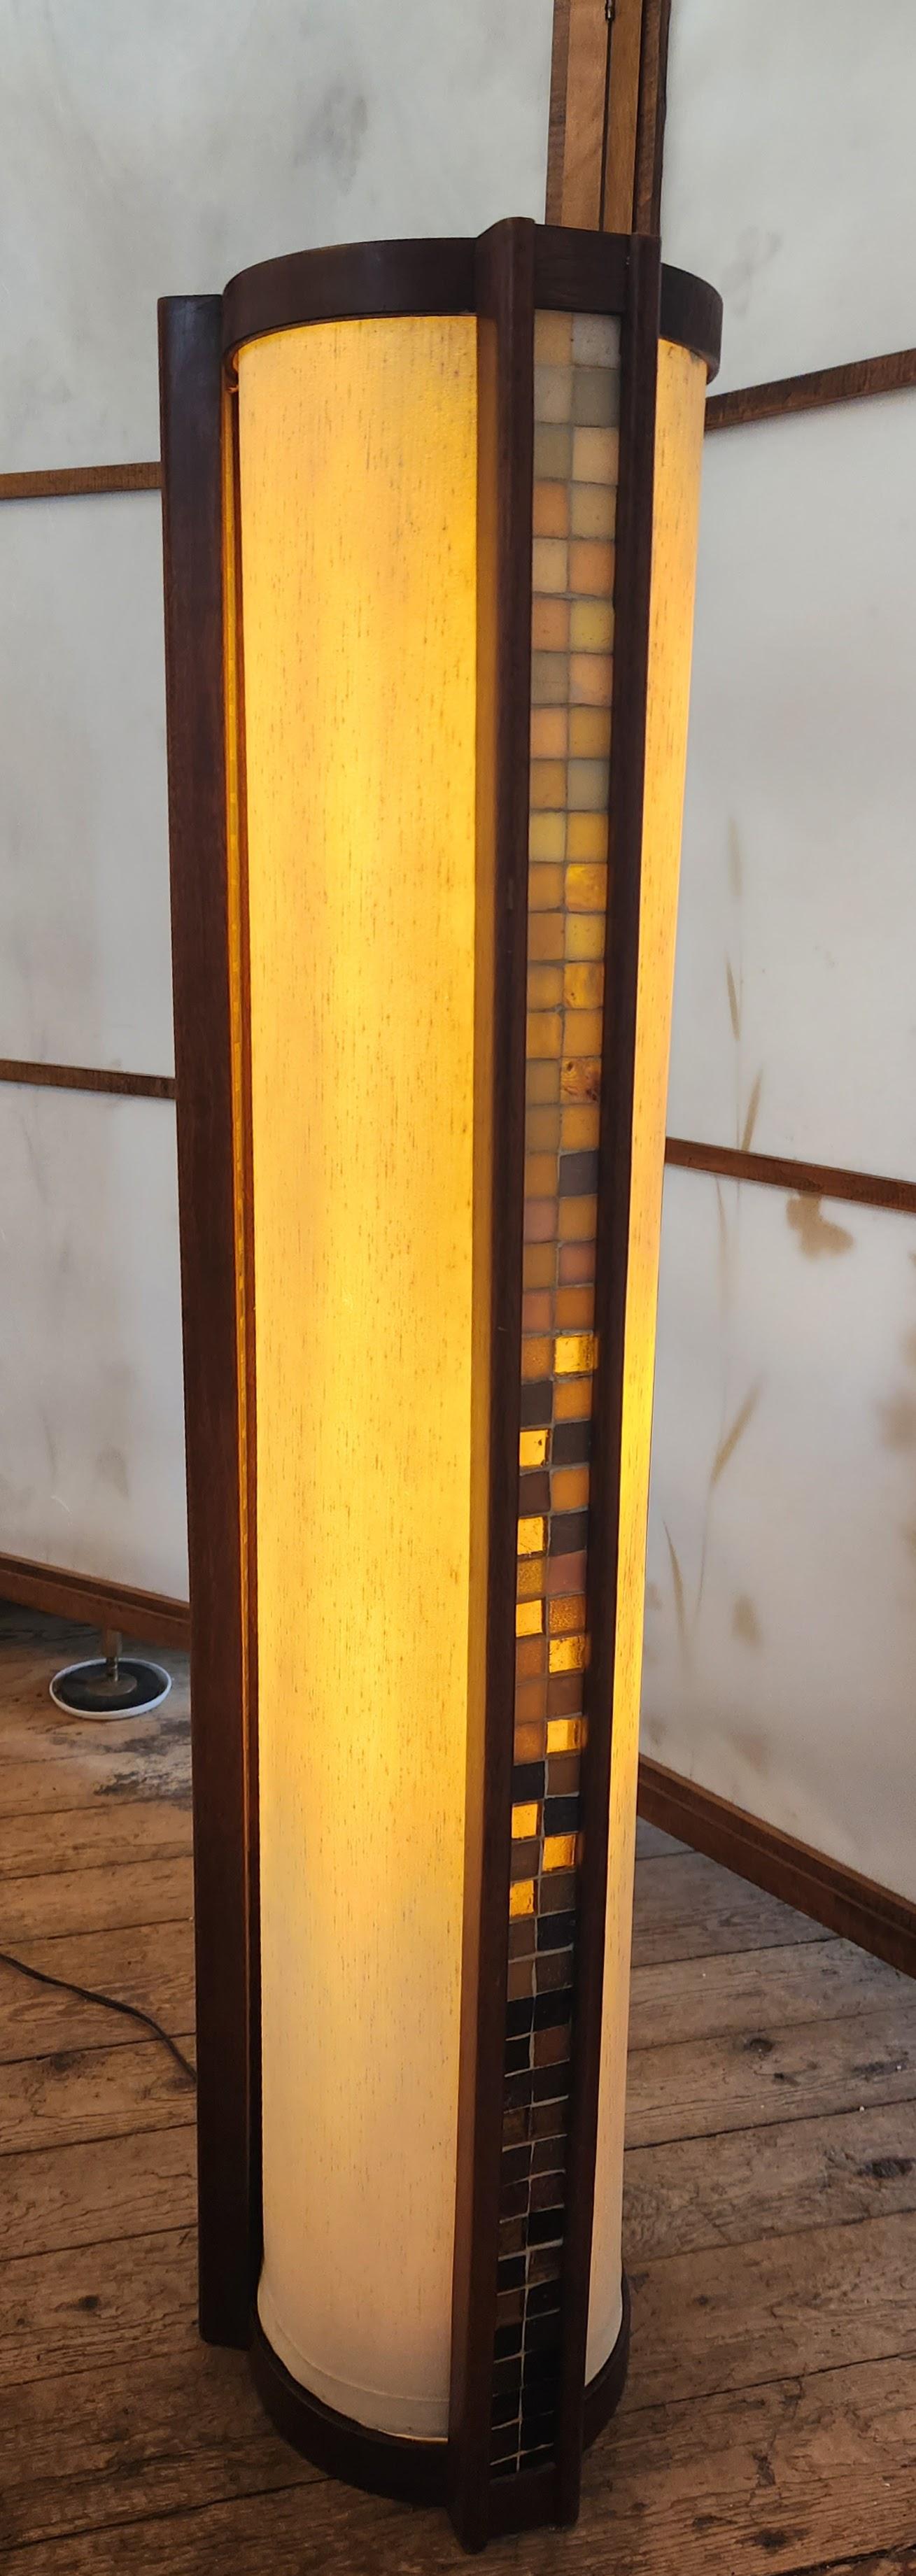 American Walnut Martin Borenstein Cylindrical Lamp with Glass Tile Panels, circa 1952 For Sale